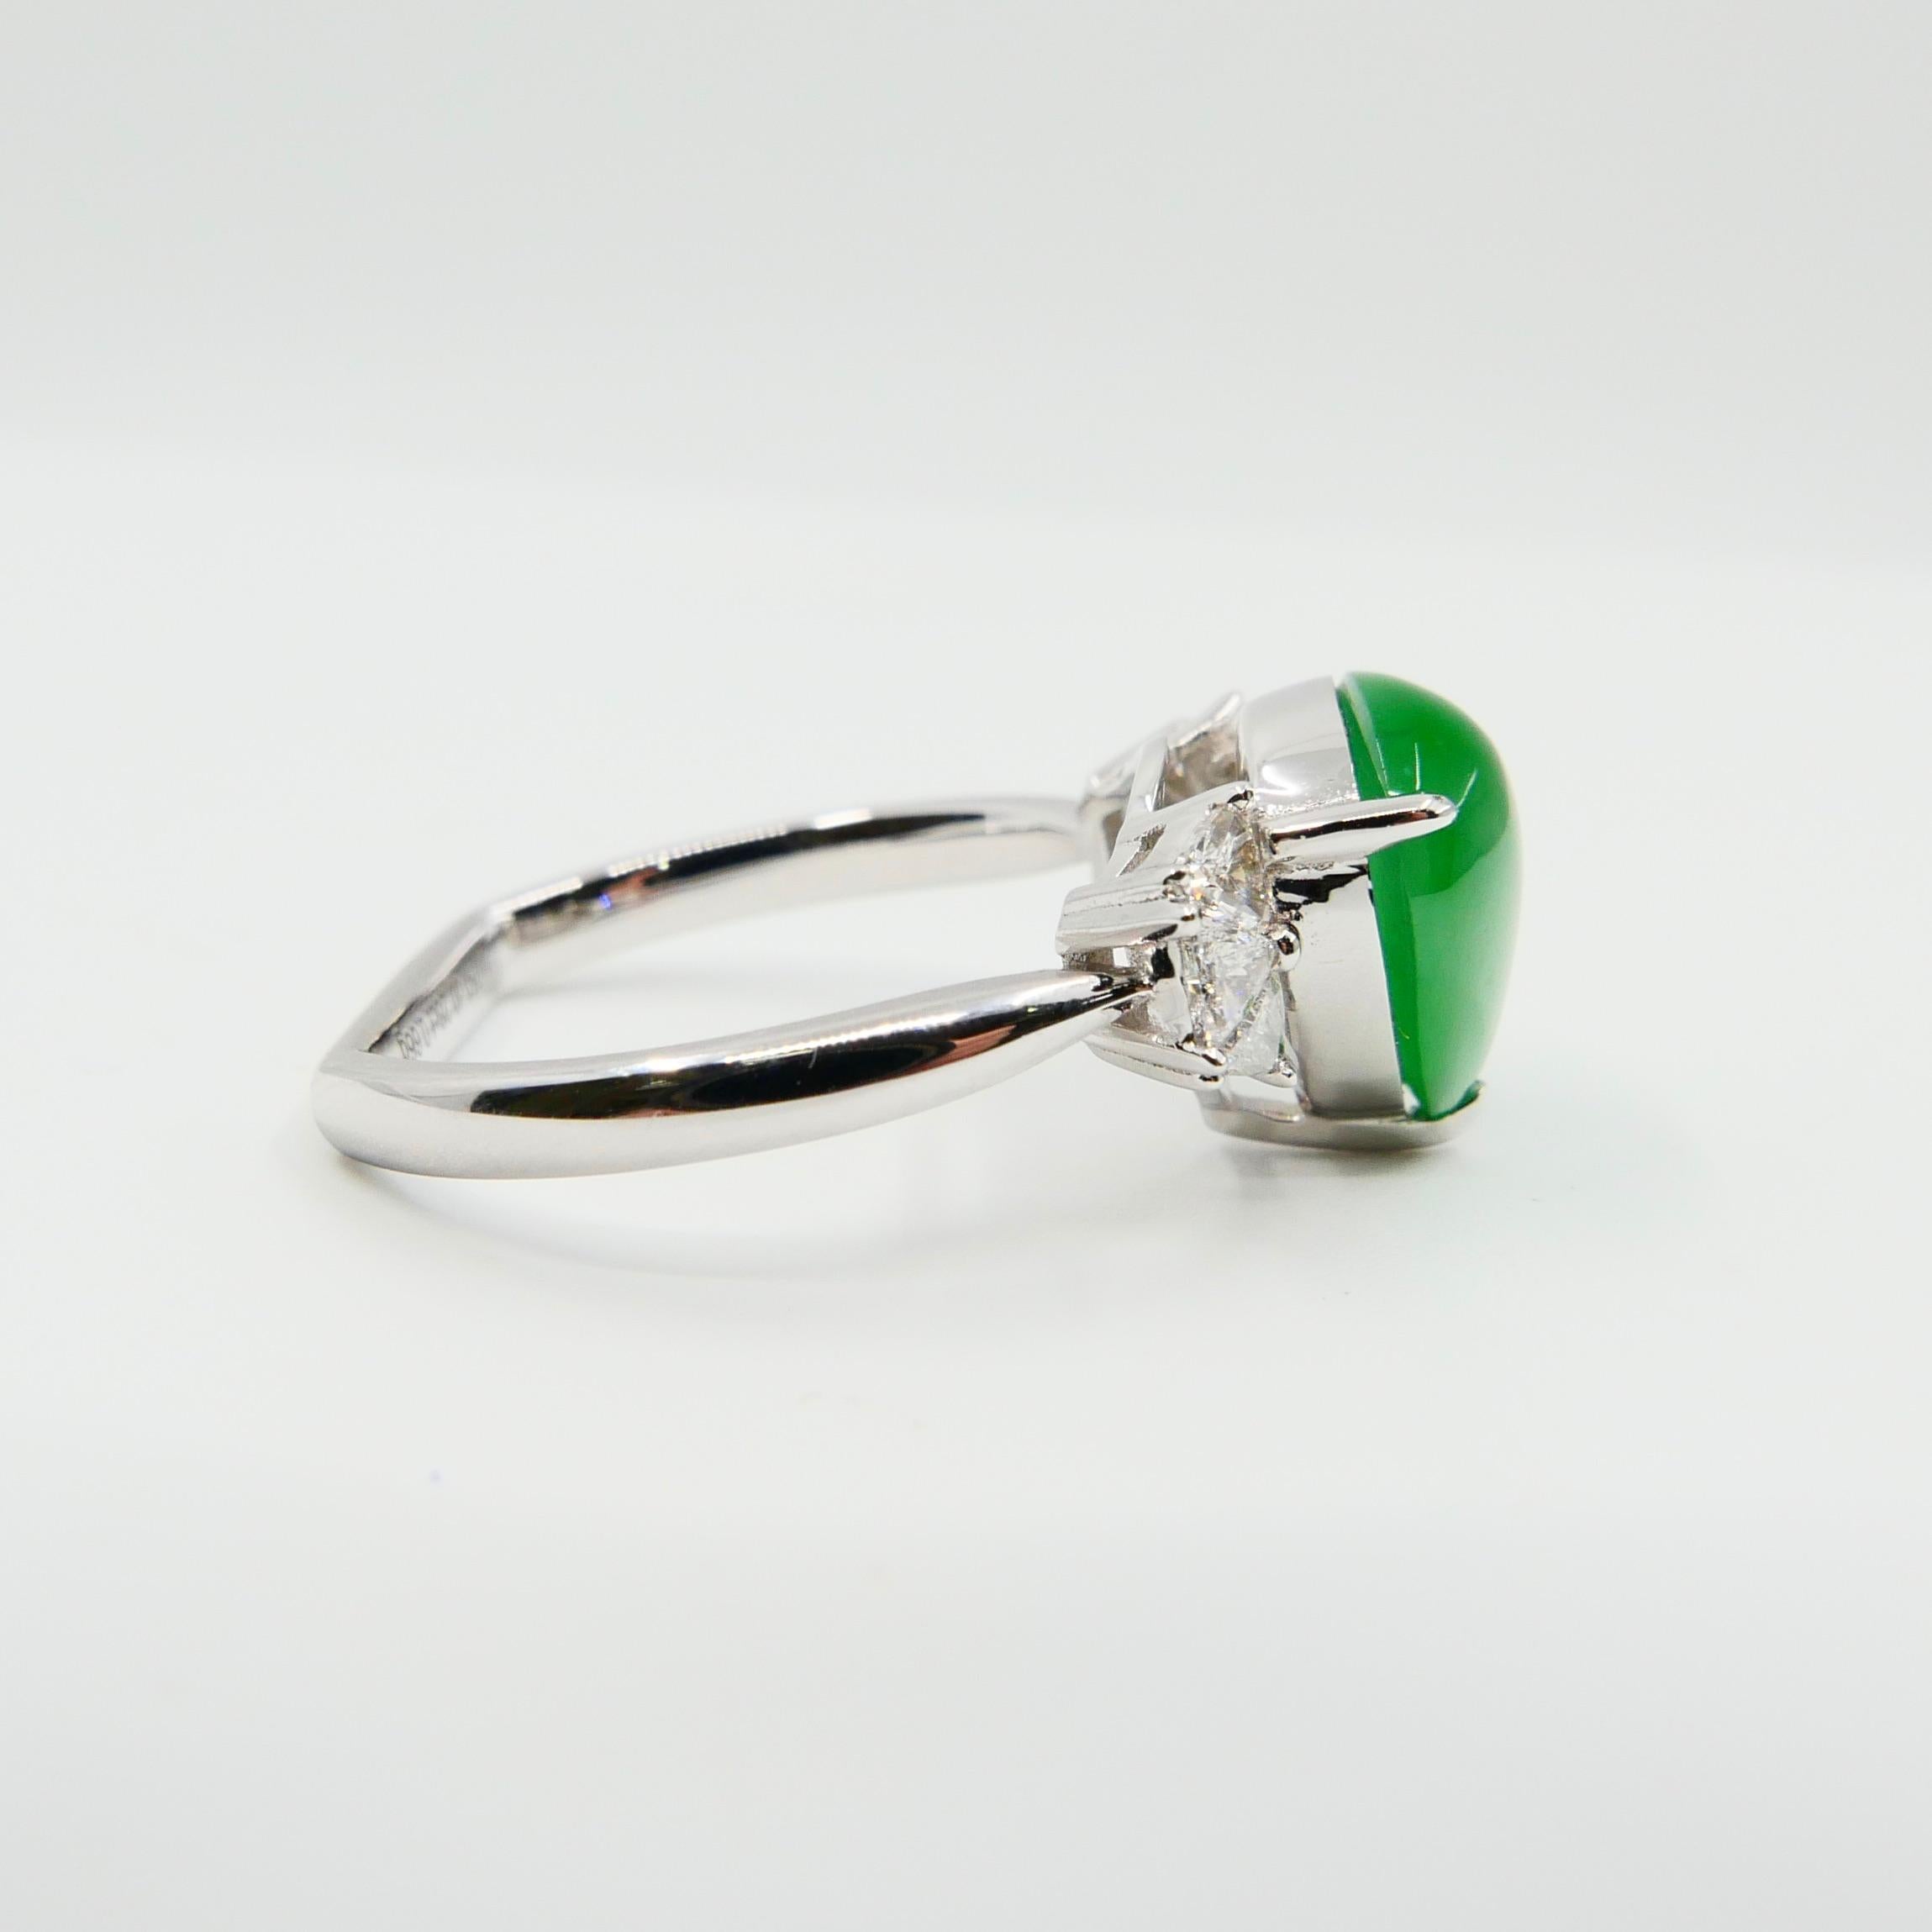 Certified Natural Type A Jadeite Jade & Diamond Cocktail Ring, Apple Green Color 6